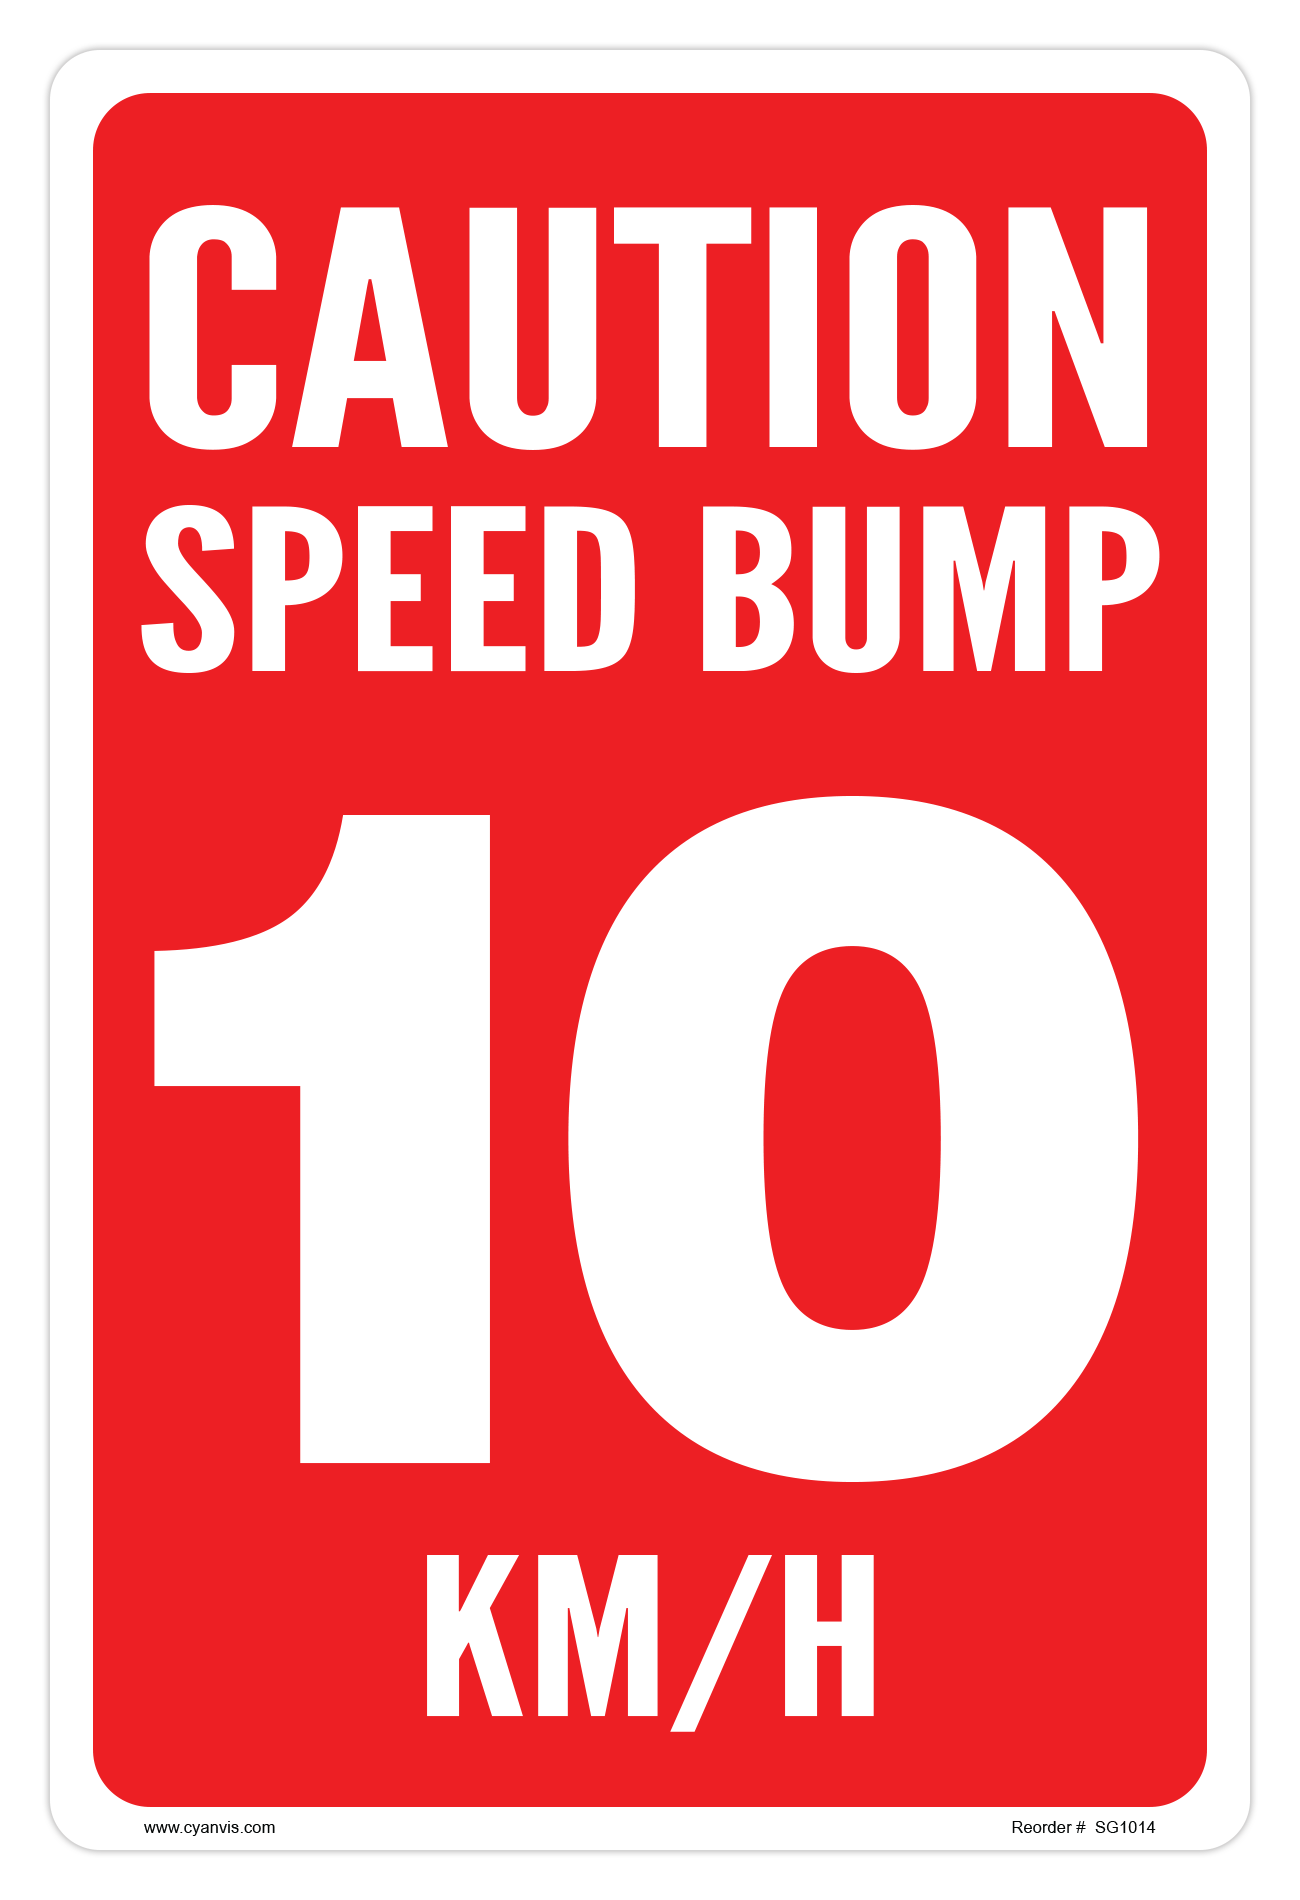 Safety Sign: Parking - CAUTION SPEED BUMP 10KM/H - CYANvisuals